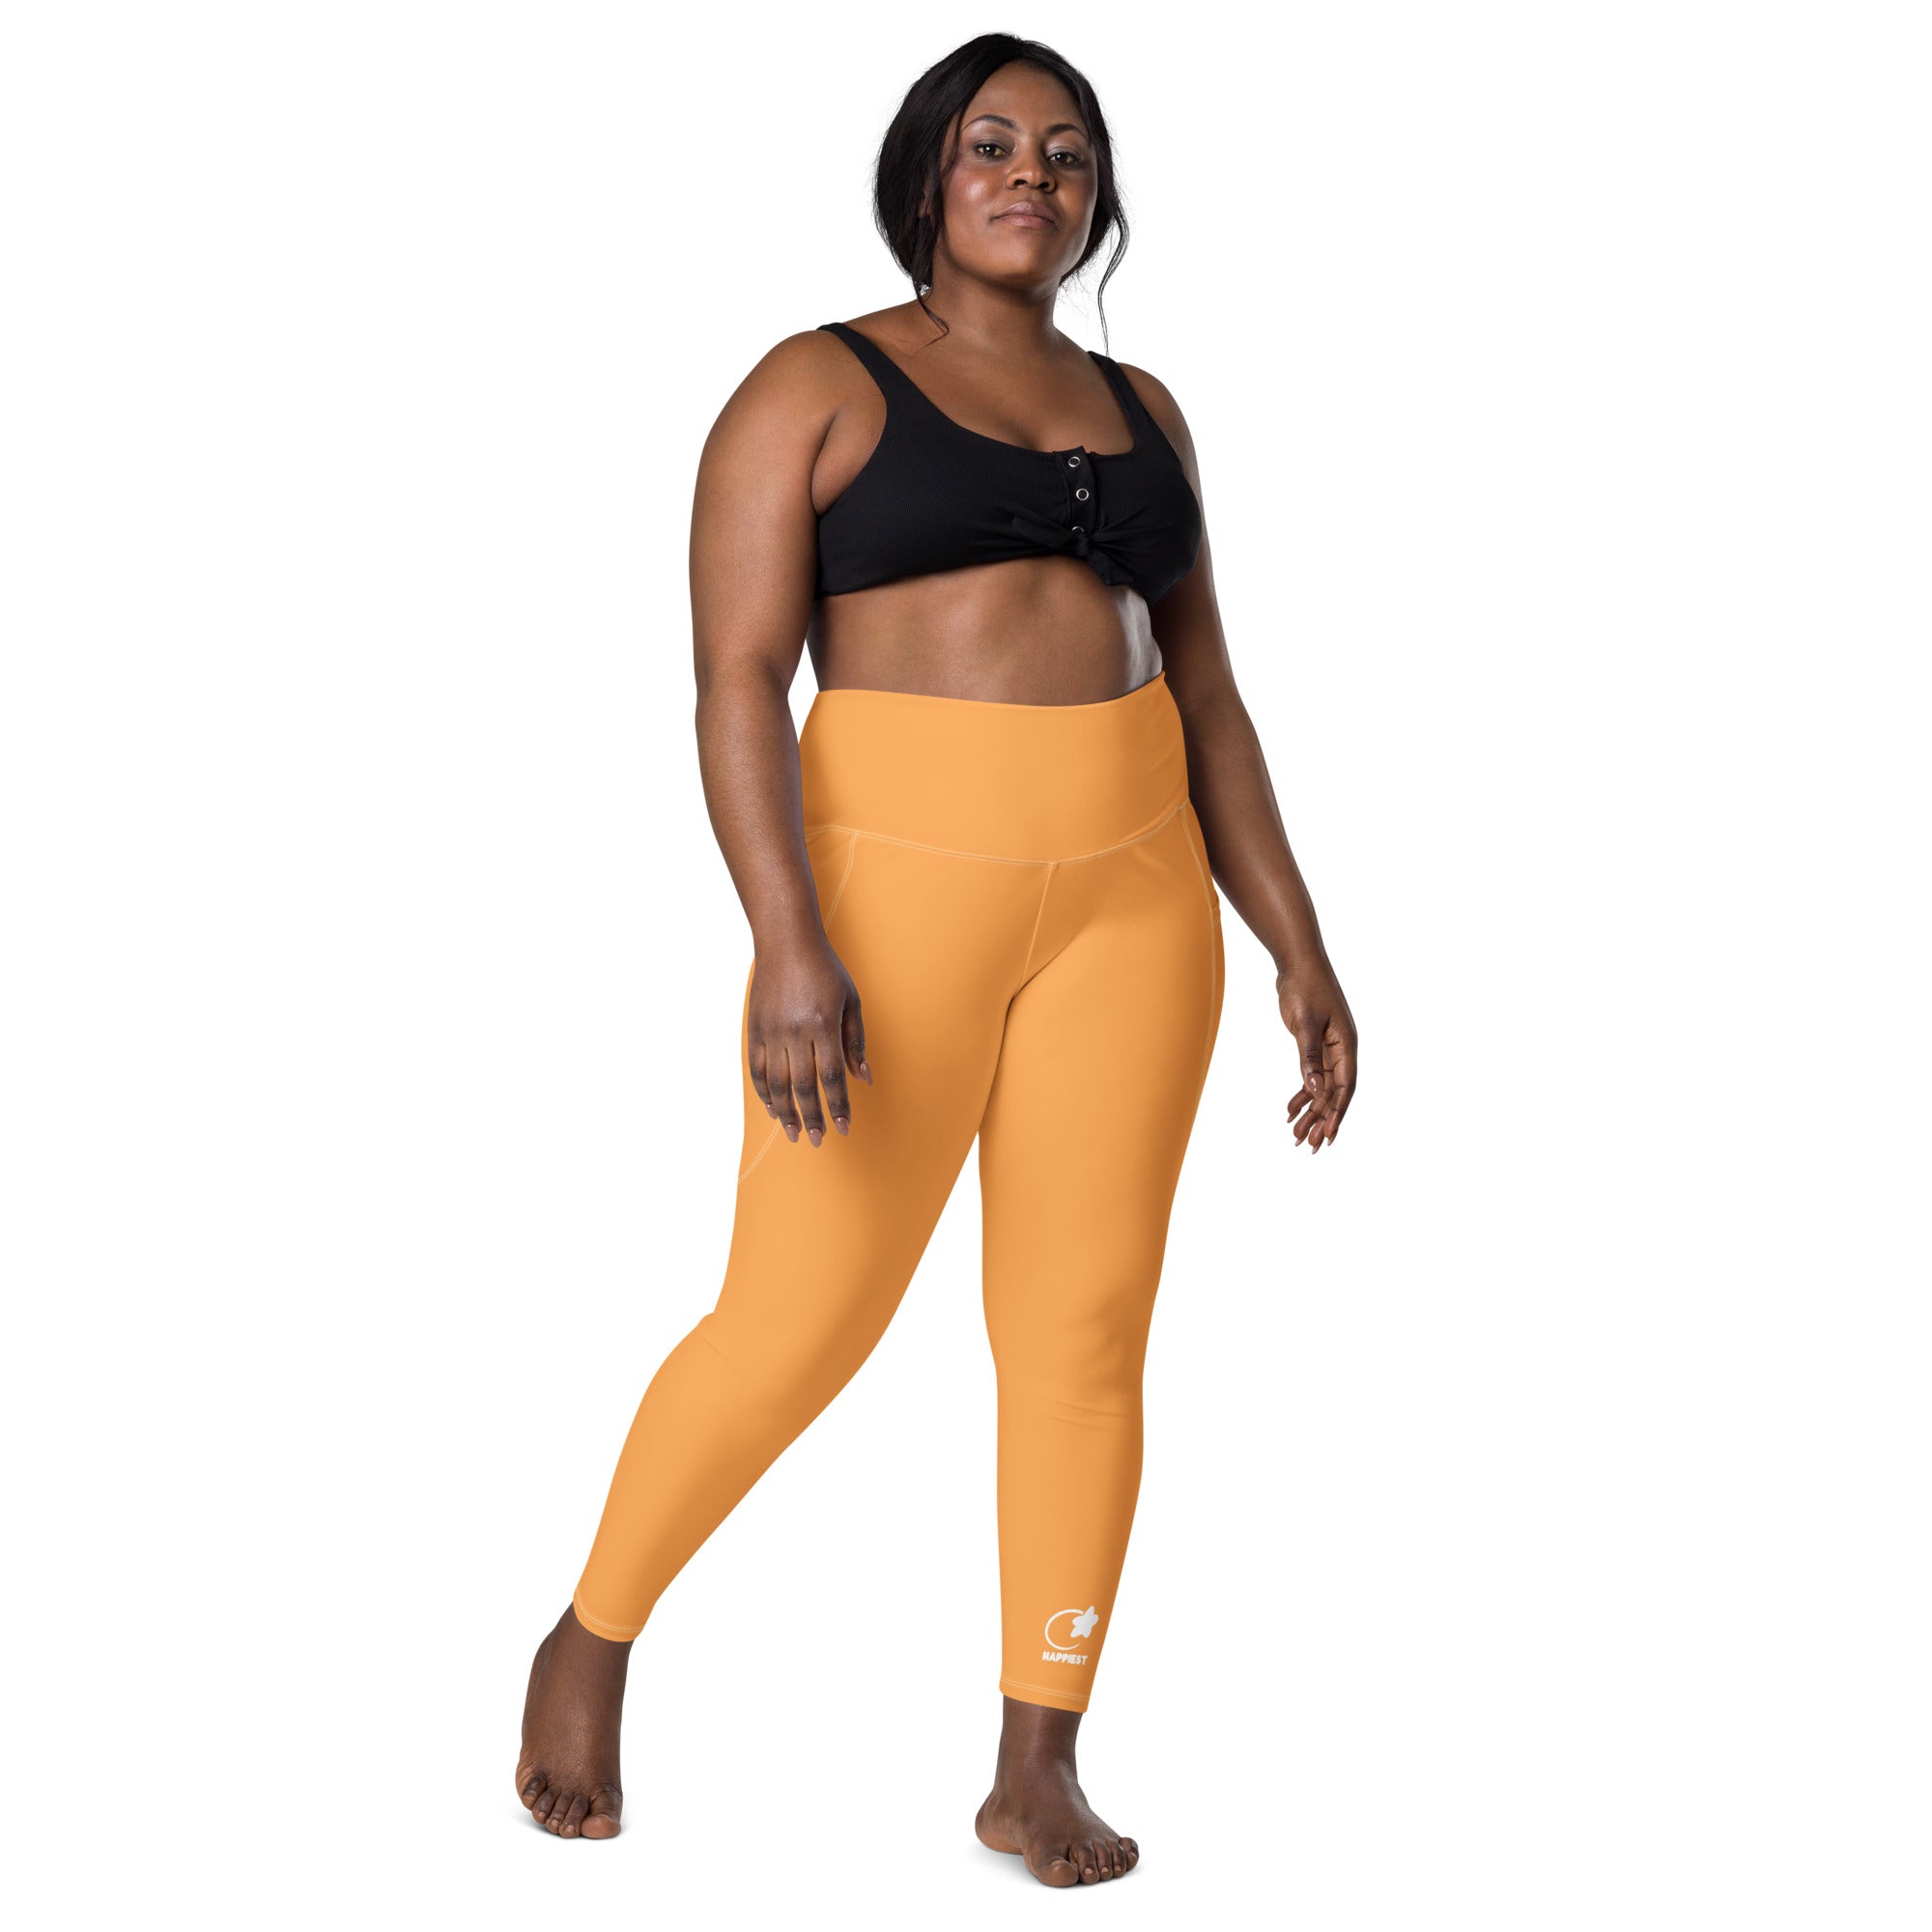 Clementine Leggings with pockets